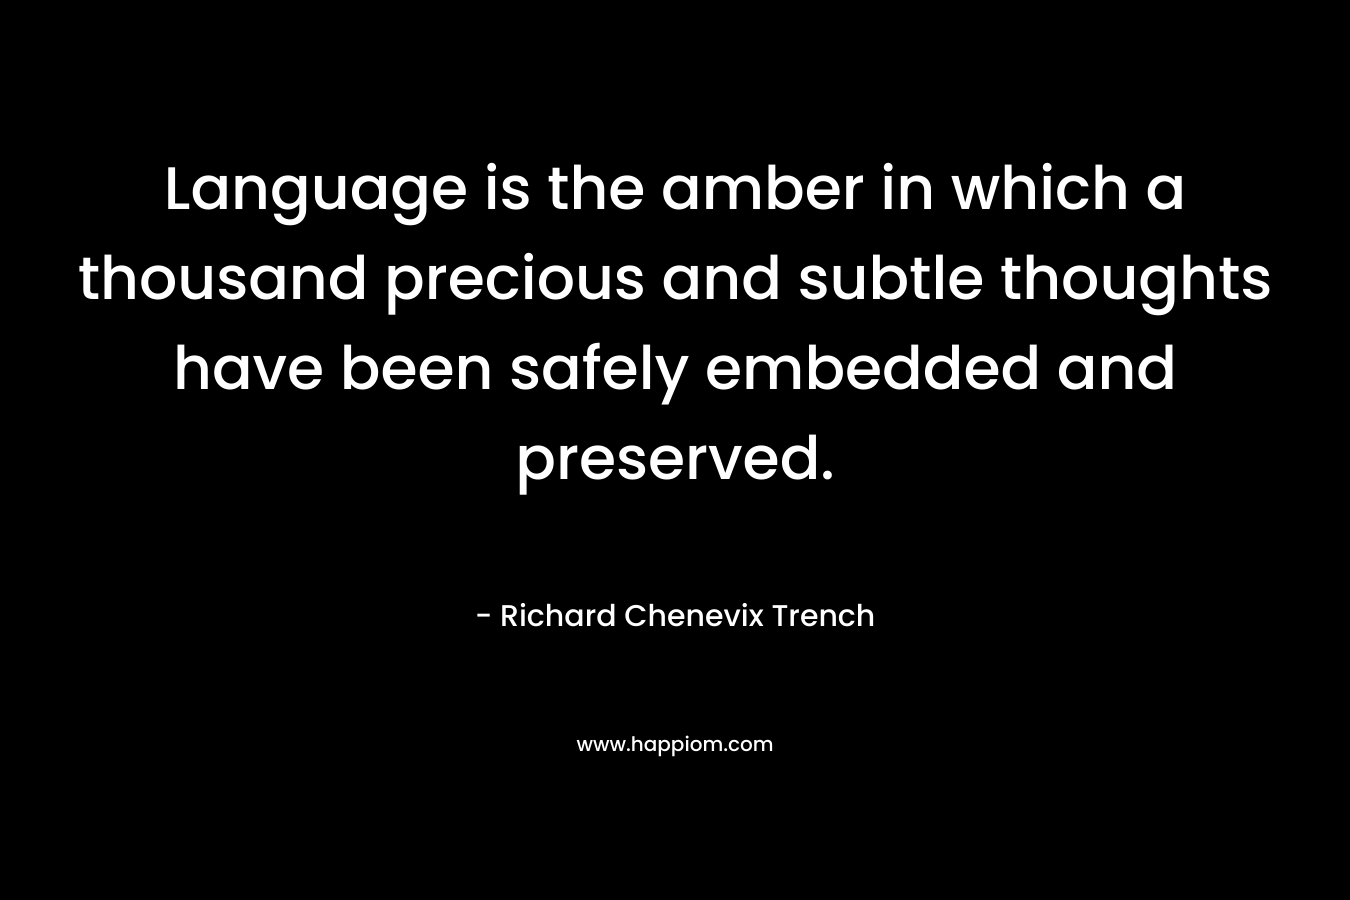 Language is the amber in which a thousand precious and subtle thoughts have been safely embedded and preserved. – Richard Chenevix Trench